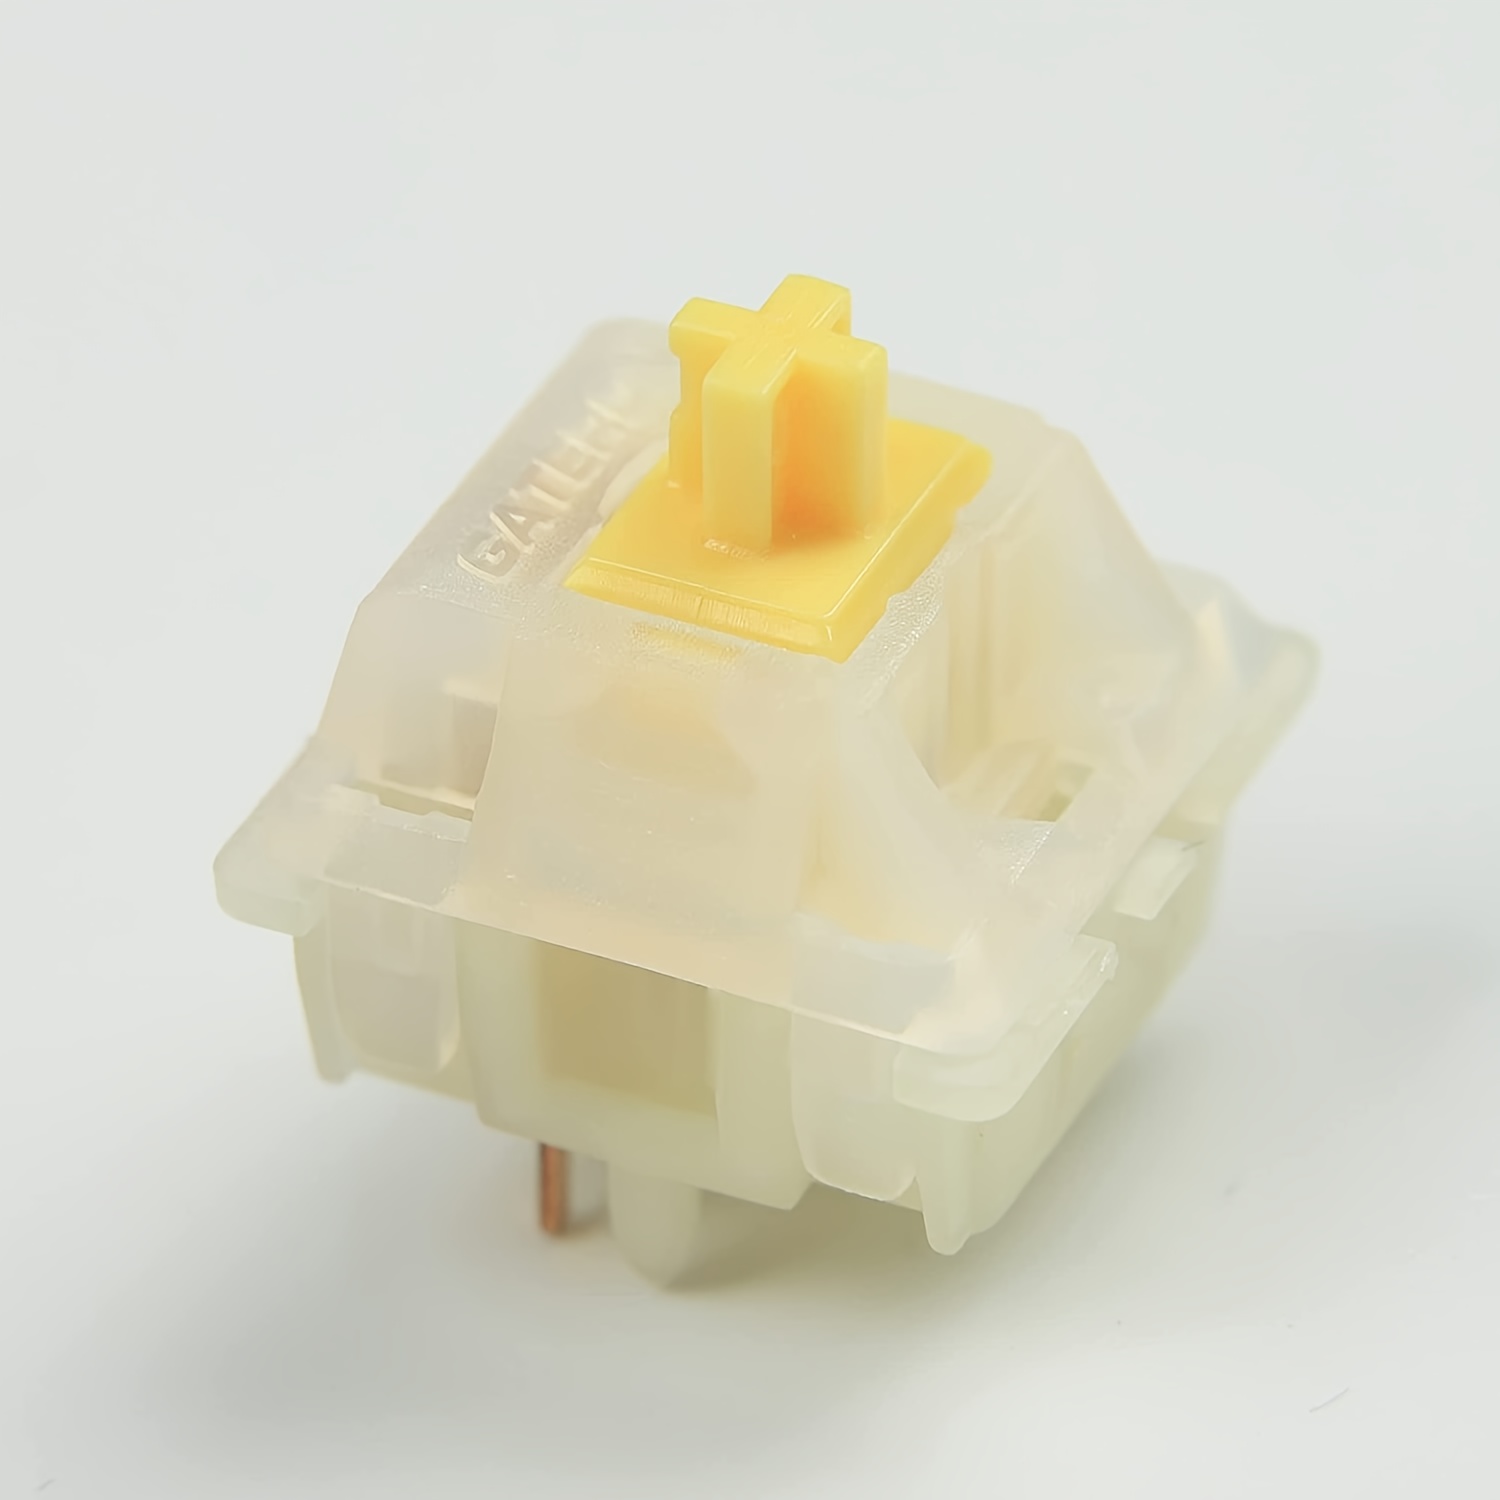 Amazing Deals on 10 PCS Milky Yellow Switches Mechanical Keyboard Support 4 Pin RGB